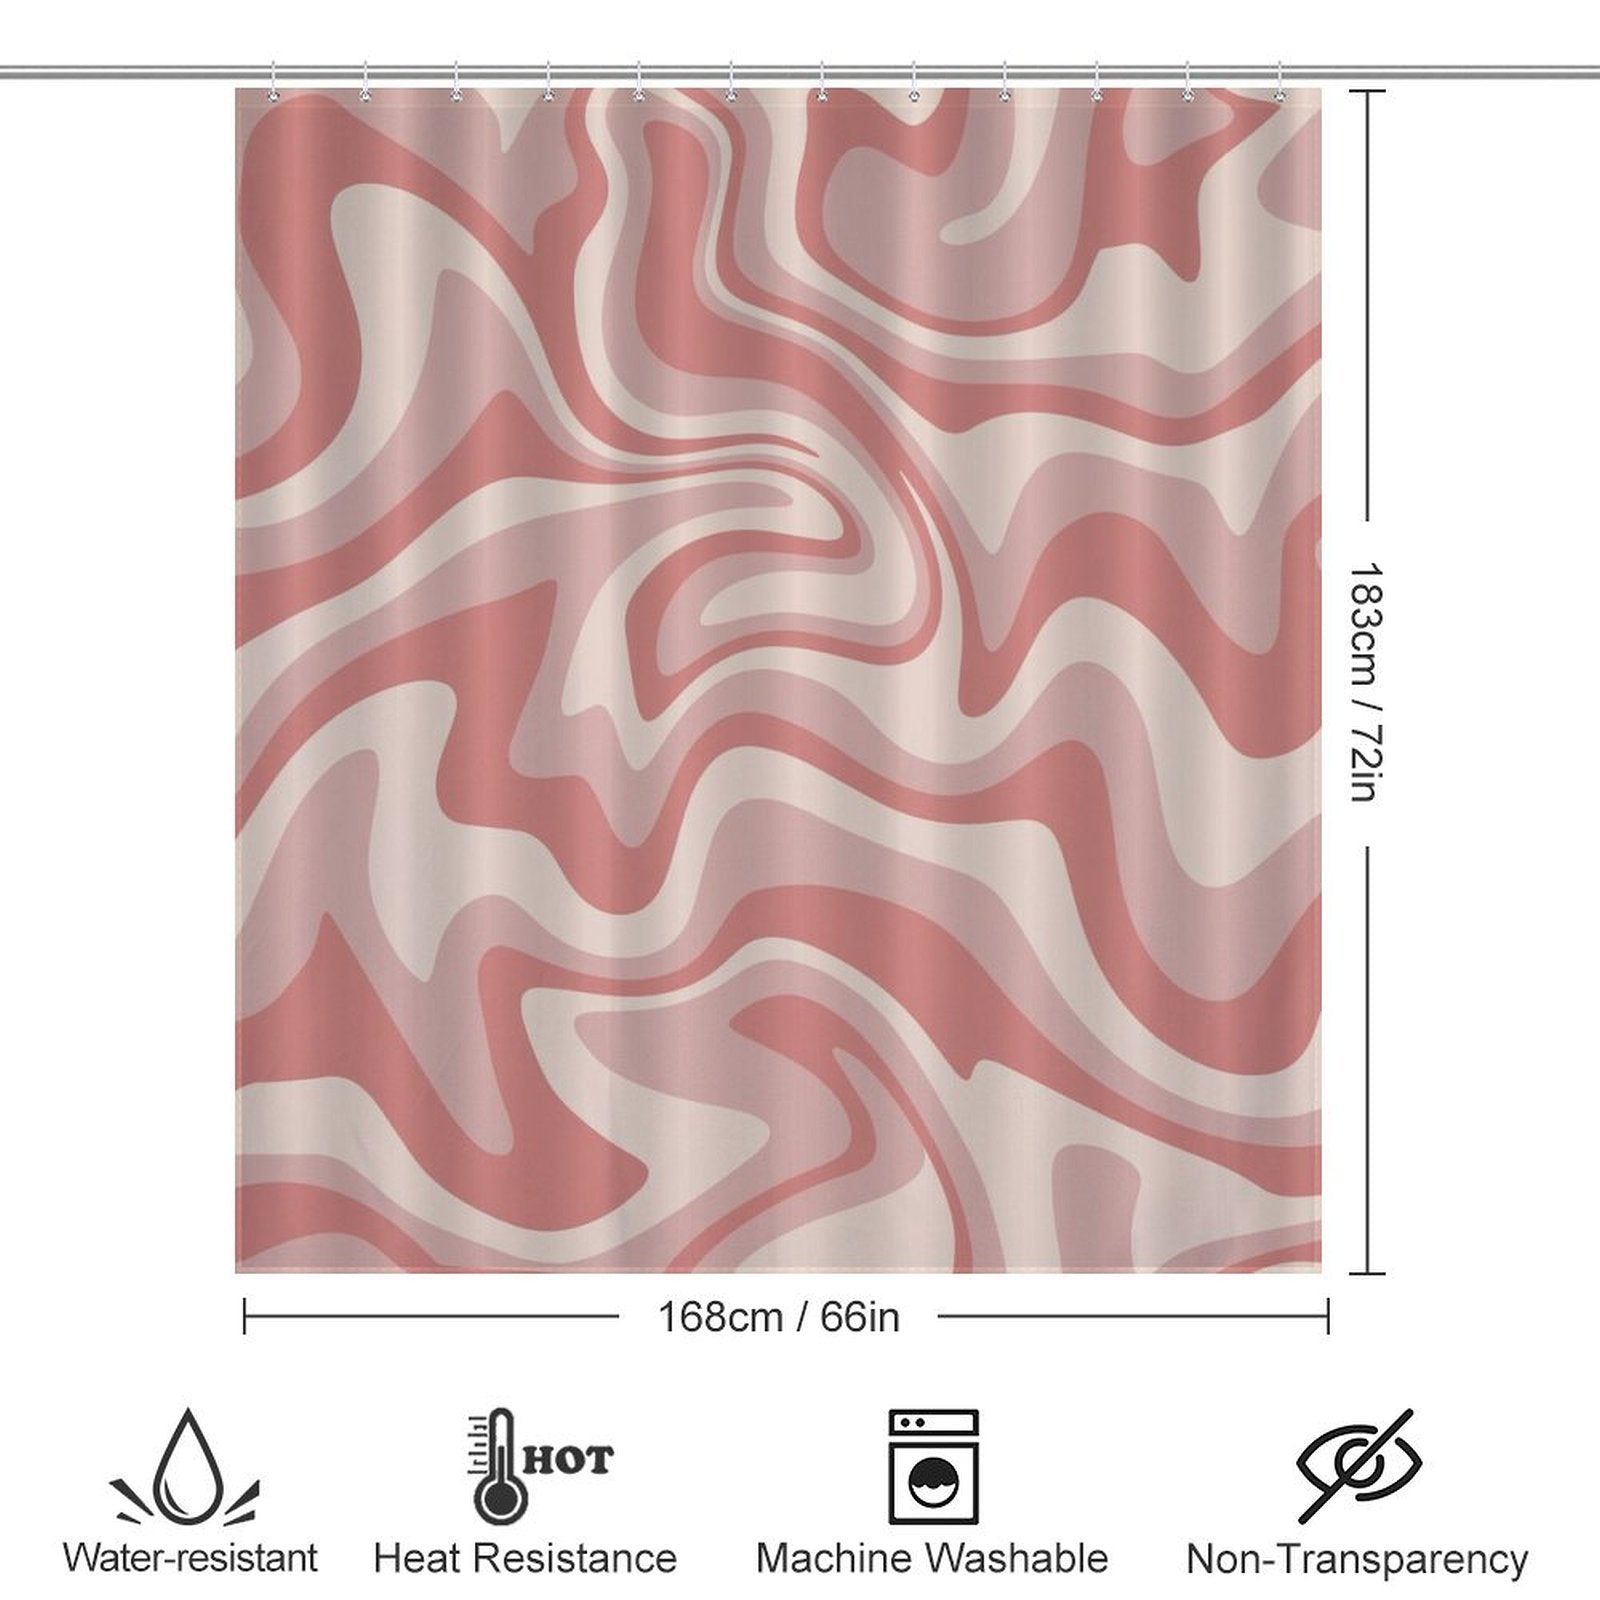 A Cotton Cat Vintage Modern Wave 70s Cute Wavy Swirl Retro Pink Abstract Shower Curtain-Cottoncat with a Retro Pink Abstract wavy pattern is shown. Below the curtain, icons indicate it is water-resistant, heat-resistant, machine washable, non-transparent, and dimensioned at 183 cm by 168 cm.